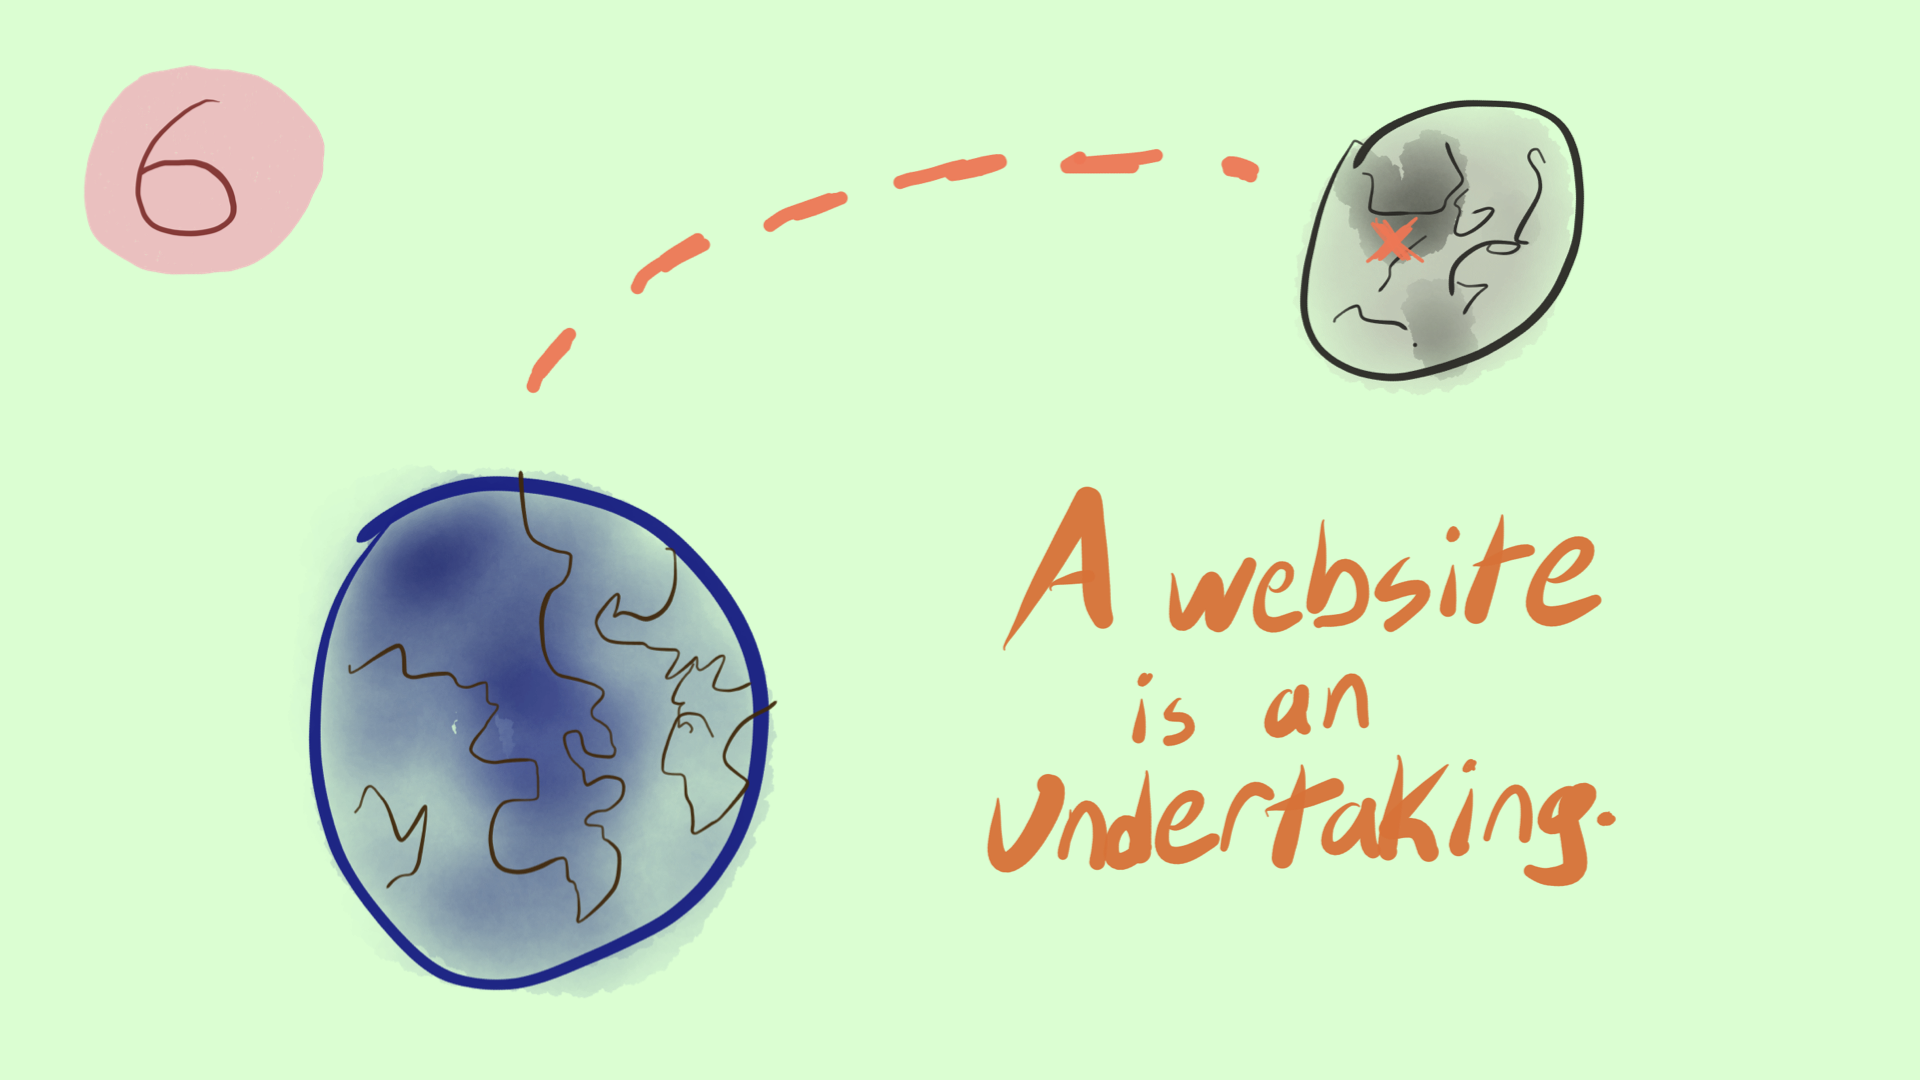 Illustration of the Earth and Moon, with a dotted line and X representing travel to the moon. "A website is an undertaking."